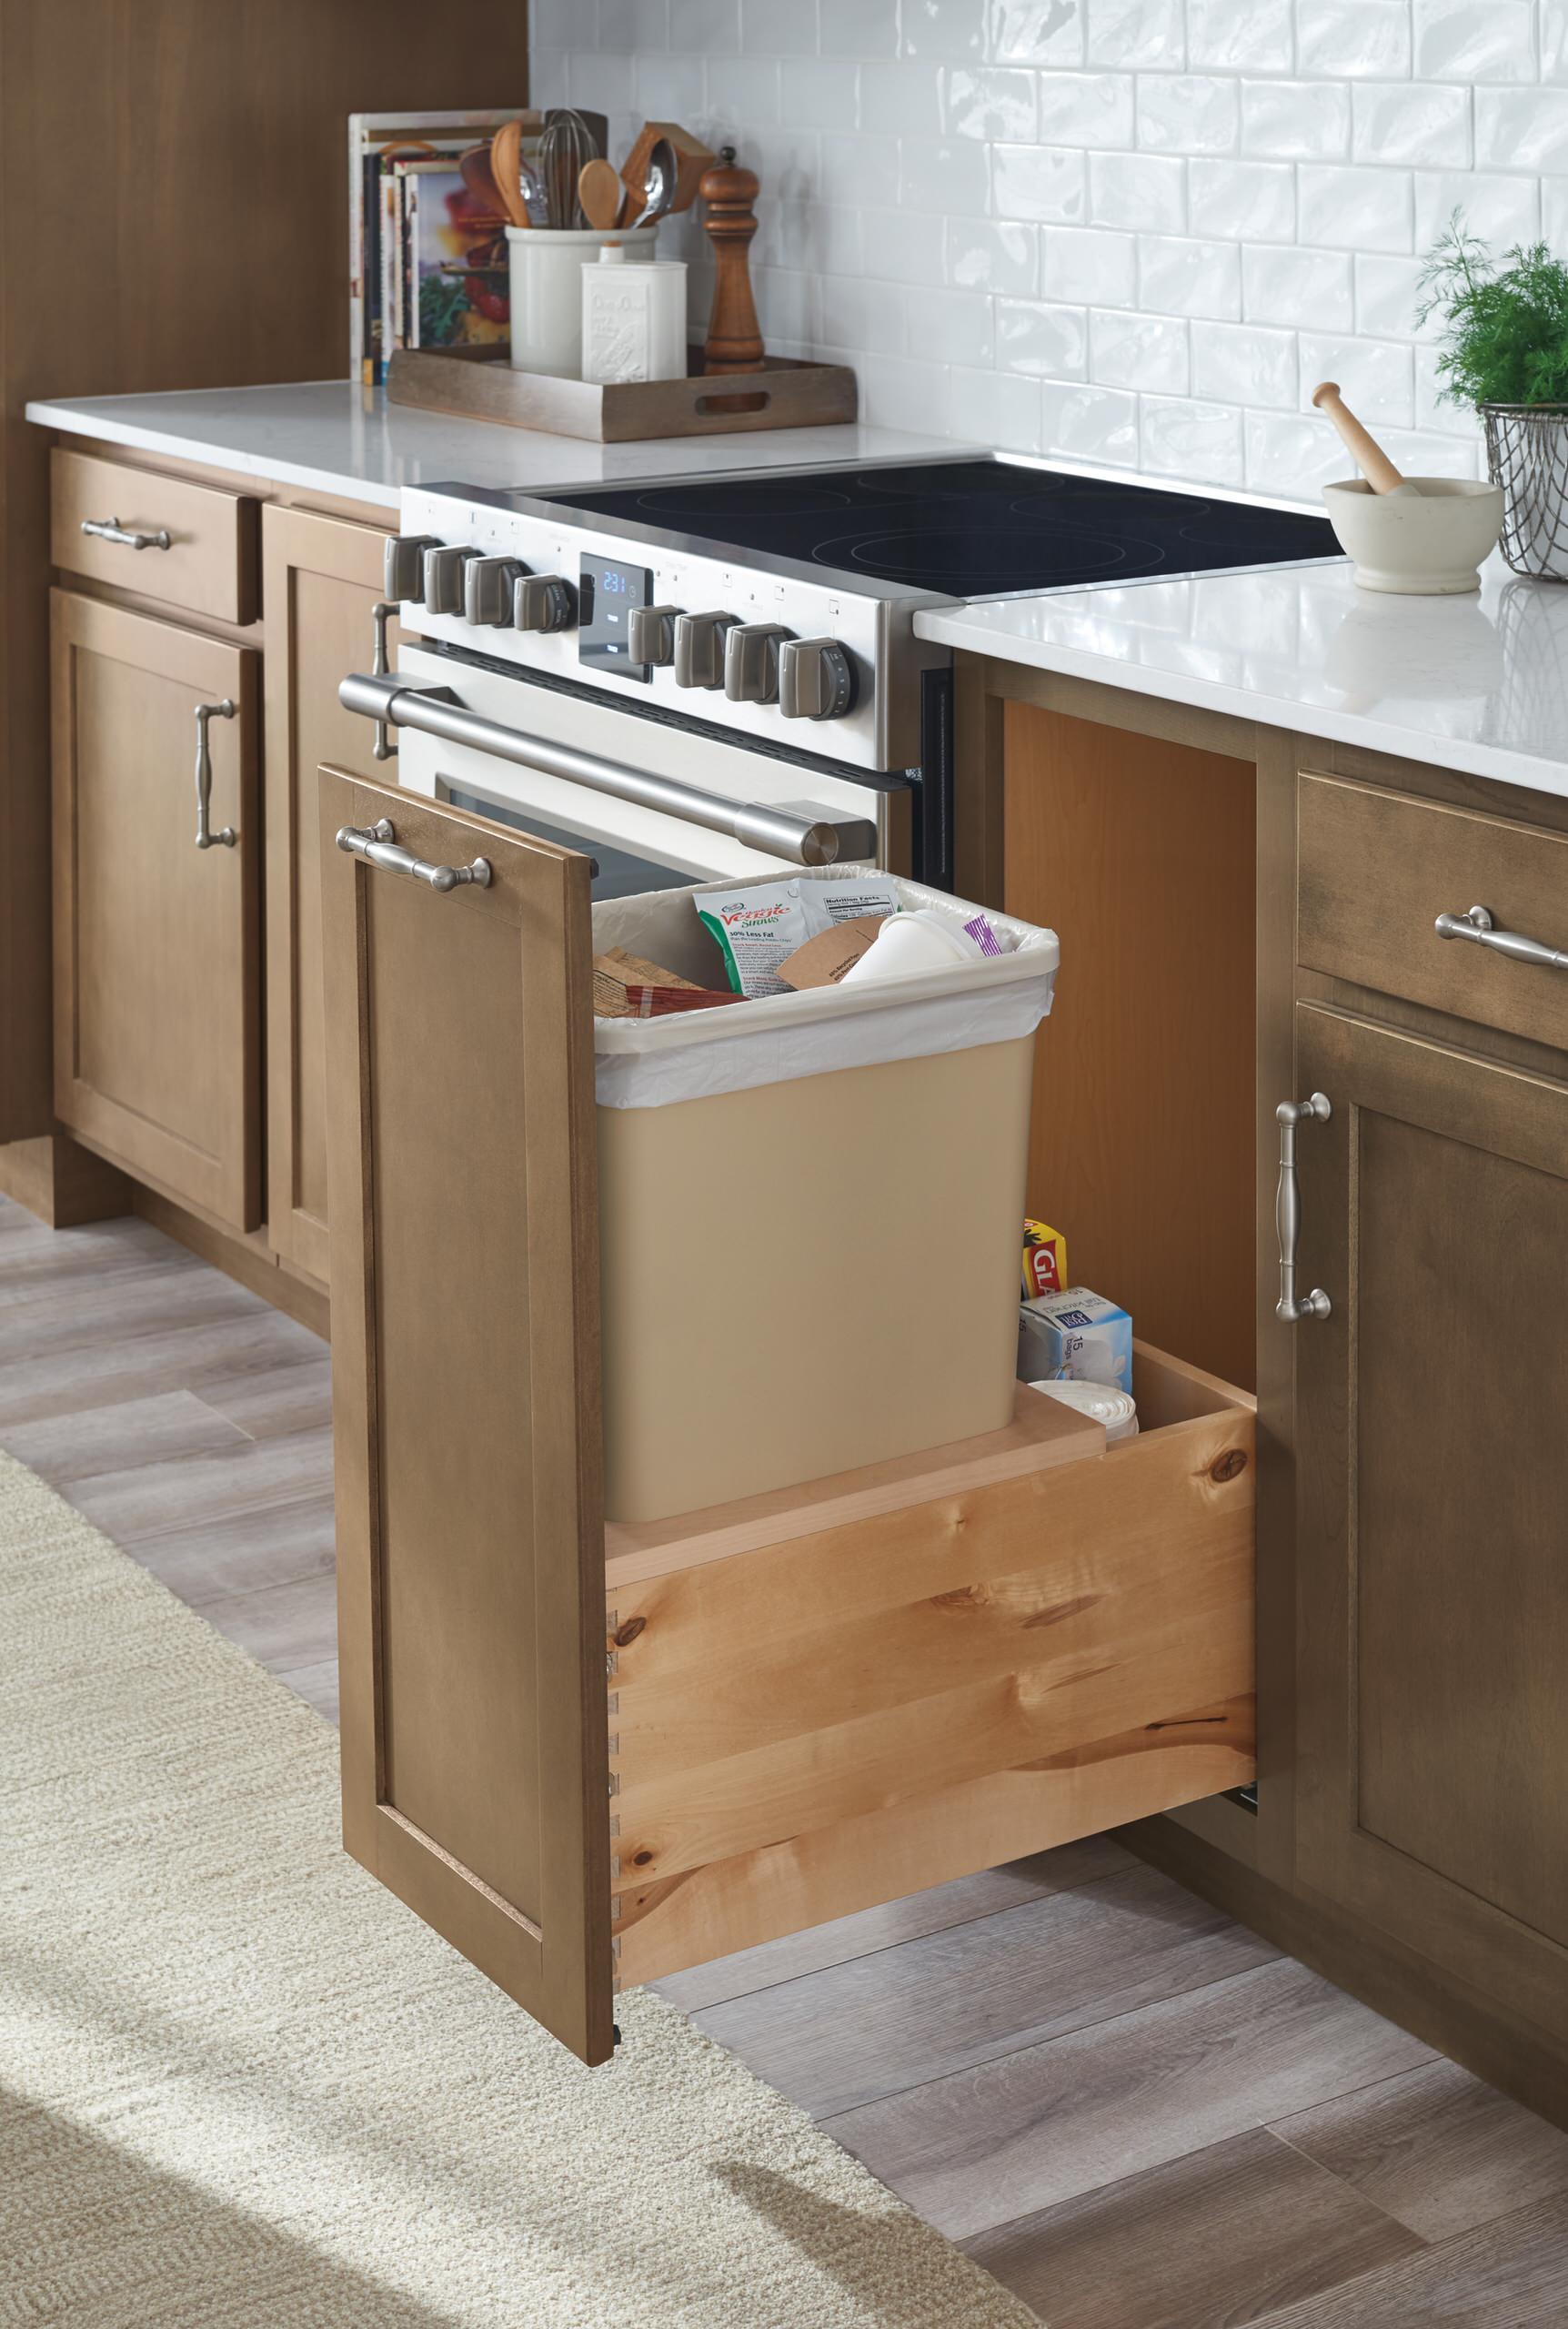 https://st.hzcdn.com/simgs/pictures/kitchens/aristokraft-cabinetry-trash-bin-cabinet-pull-out-masterbrand-cabinets-inc-img~a361bc230babcd1f_14-2501-1-0b91e46.jpg